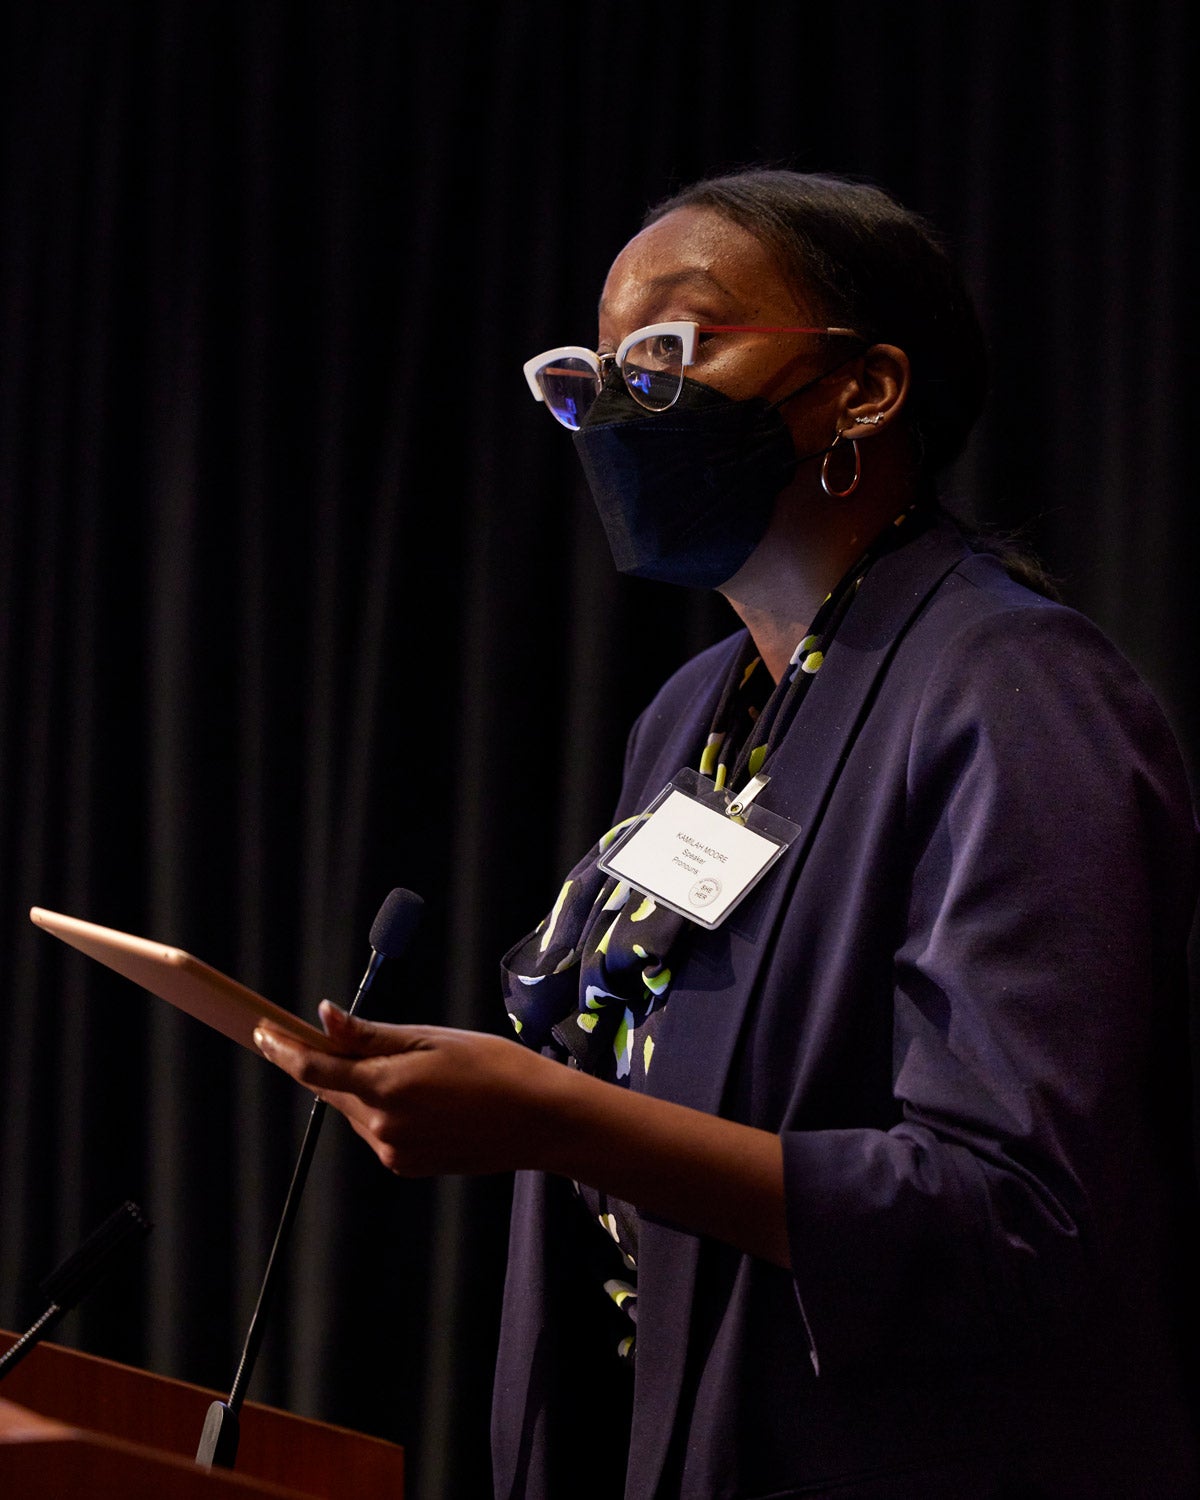 Kamilah Moore wears a black facemaks, bright white cat-eyed glasses and holds an ipad while speaking at a podium